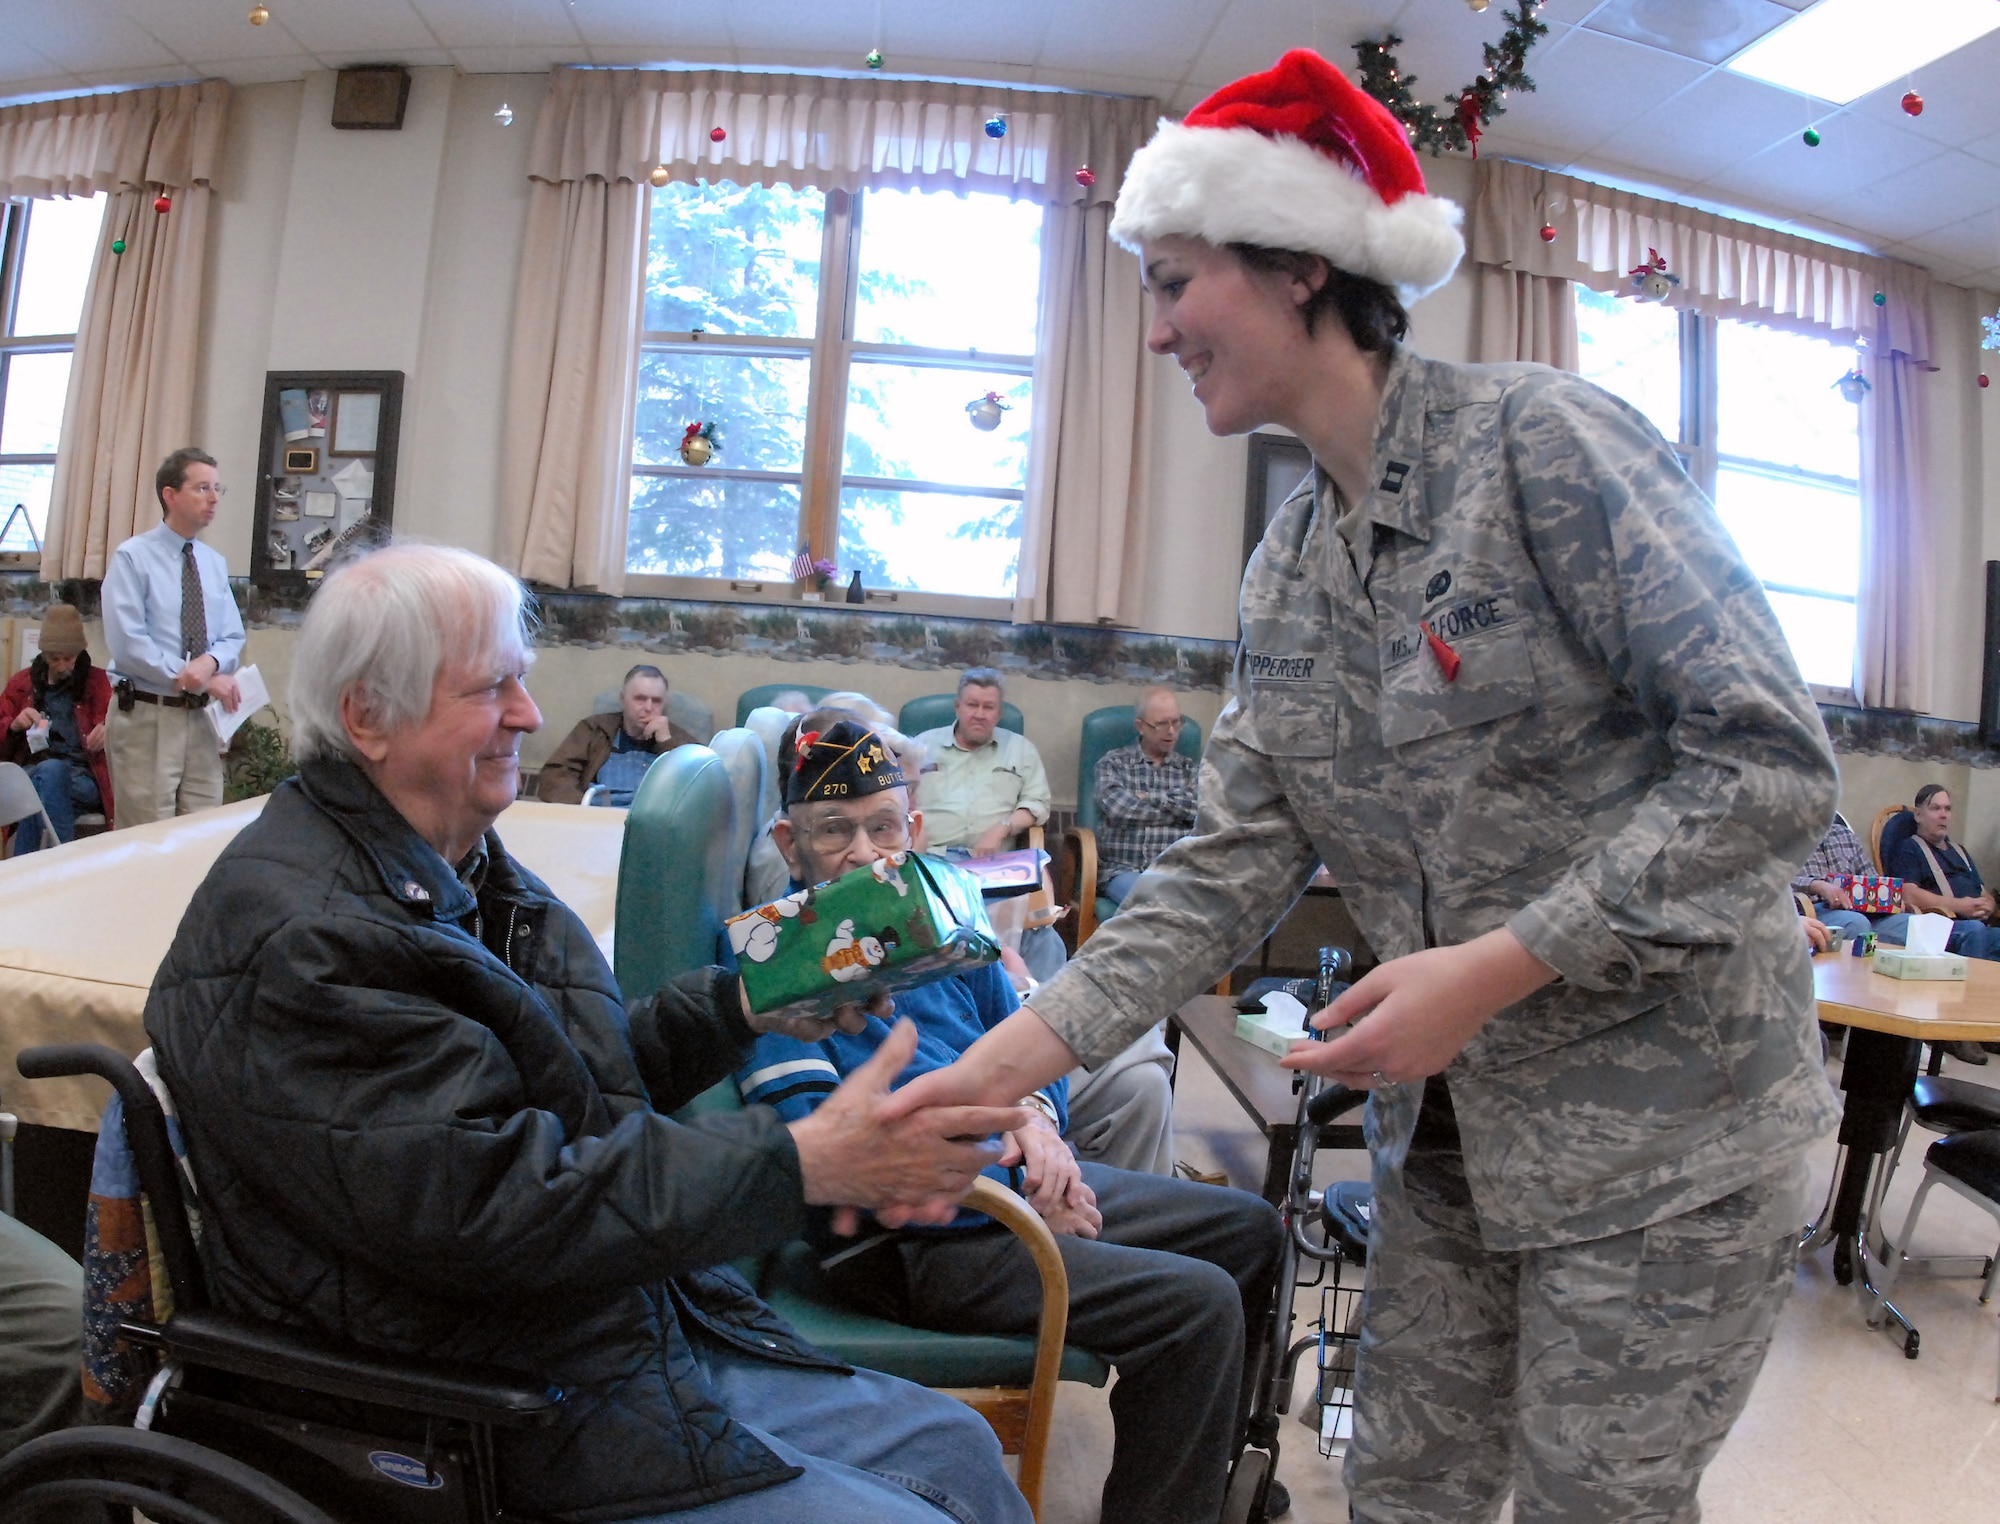 Capt. Penny Ripperger gives a Christmas gift to Navy veteran Howard Kvamme at the North Dakota Veteran's Nursing Home Dec. 10 in Lisbon, N.D. The gifts are given to veterans at the nursing home by the North Dakota Air and Army National Guard each December using funds raised through personal donations given by the North Dakota National Guard members. Captain Ripperger is the 119th Wing public affairs officer. (U.S. Air Force photo/Senior Master Sgt. David H. Lipp) 